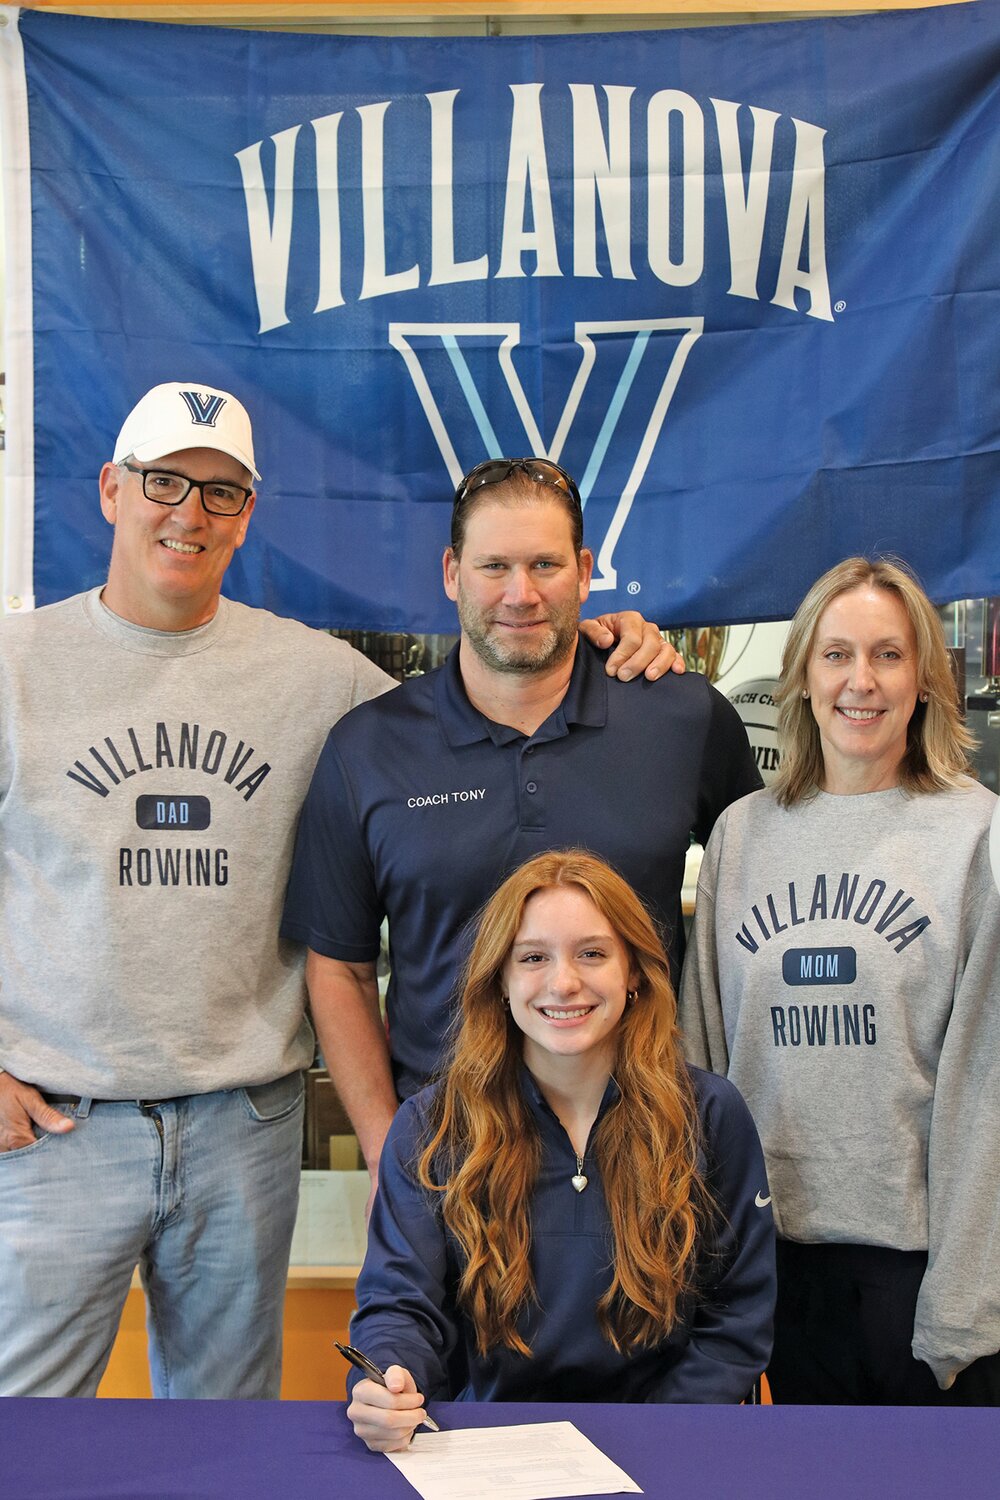 Solebury School recently held a National Signing Day ceremony for senior Kate Shipley, who will continue her rowing career at Villanova University. Joining her at the ceremony are her parents and her coach from Swan Creek Rowing Club, Tony Gambescia.